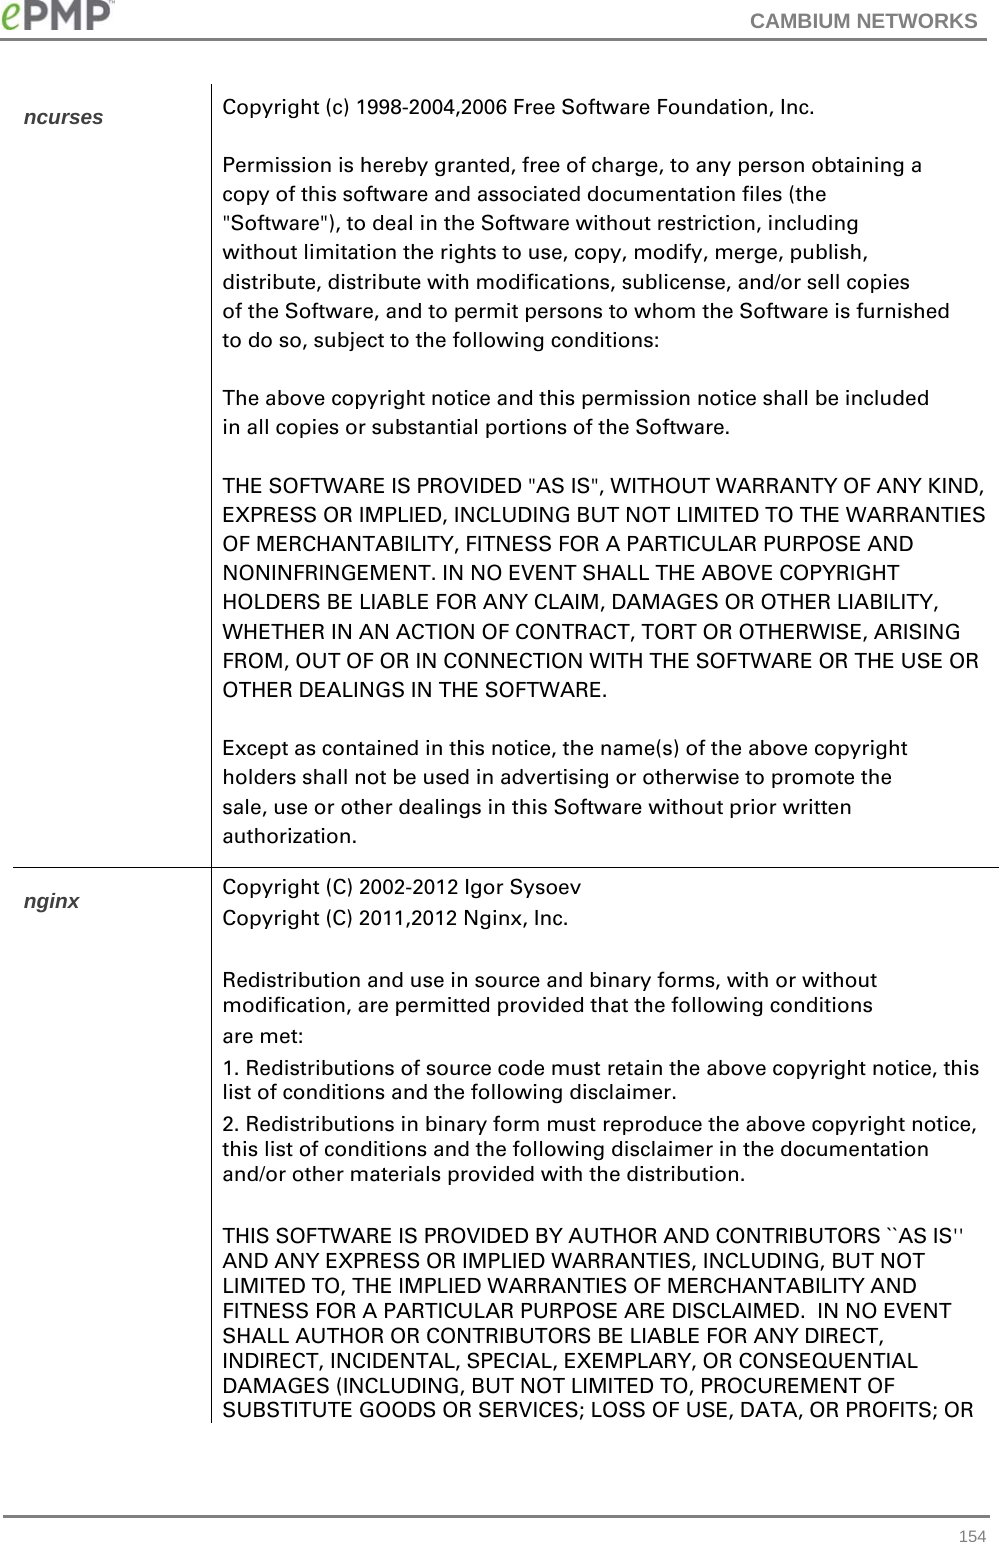 CAMBIUM NETWORKS   154ncurses  Copyright (c) 1998-2004,2006 Free Software Foundation, Inc.                                                                                           Permission is hereby granted, free of charge, to any person obtaining a    copy of this software and associated documentation files (the              &quot;Software&quot;), to deal in the Software without restriction, including        without limitation the rights to use, copy, modify, merge, publish,        distribute, distribute with modifications, sublicense, and/or sell copies  of the Software, and to permit persons to whom the Software is furnished   to do so, subject to the following conditions:                                                                                                        The above copyright notice and this permission notice shall be included    in all copies or substantial portions of the Software.                                                                                                THE SOFTWARE IS PROVIDED &quot;AS IS&quot;, WITHOUT WARRANTY OF ANY KIND, EXPRESS OR IMPLIED, INCLUDING BUT NOT LIMITED TO THE WARRANTIES OF MERCHANTABILITY, FITNESS FOR A PARTICULAR PURPOSE AND NONINFRINGEMENT. IN NO EVENT SHALL THE ABOVE COPYRIGHT HOLDERS BE LIABLE FOR ANY CLAIM, DAMAGES OR OTHER LIABILITY, WHETHER IN AN ACTION OF CONTRACT, TORT OR OTHERWISE, ARISING FROM, OUT OF OR IN CONNECTION WITH THE SOFTWARE OR THE USE OR OTHER DEALINGS IN THE SOFTWARE.                                                                                                                Except as contained in this notice, the name(s) of the above copyright     holders shall not be used in advertising or otherwise to promote the       sale, use or other dealings in this Software without prior written         authorization.                                                           nginx  Copyright (C) 2002-2012 Igor Sysoev Copyright (C) 2011,2012 Nginx, Inc.  Redistribution and use in source and binary forms, with or without modification, are permitted provided that the following conditions are met: 1. Redistributions of source code must retain the above copyright notice, this list of conditions and the following disclaimer. 2. Redistributions in binary form must reproduce the above copyright notice, this list of conditions and the following disclaimer in the documentation and/or other materials provided with the distribution.  THIS SOFTWARE IS PROVIDED BY AUTHOR AND CONTRIBUTORS ``AS IS&apos;&apos; AND ANY EXPRESS OR IMPLIED WARRANTIES, INCLUDING, BUT NOT LIMITED TO, THE IMPLIED WARRANTIES OF MERCHANTABILITY AND FITNESS FOR A PARTICULAR PURPOSE ARE DISCLAIMED.  IN NO EVENT SHALL AUTHOR OR CONTRIBUTORS BE LIABLE FOR ANY DIRECT, INDIRECT, INCIDENTAL, SPECIAL, EXEMPLARY, OR CONSEQUENTIAL DAMAGES (INCLUDING, BUT NOT LIMITED TO, PROCUREMENT OF SUBSTITUTE GOODS OR SERVICES; LOSS OF USE, DATA, OR PROFITS; OR 